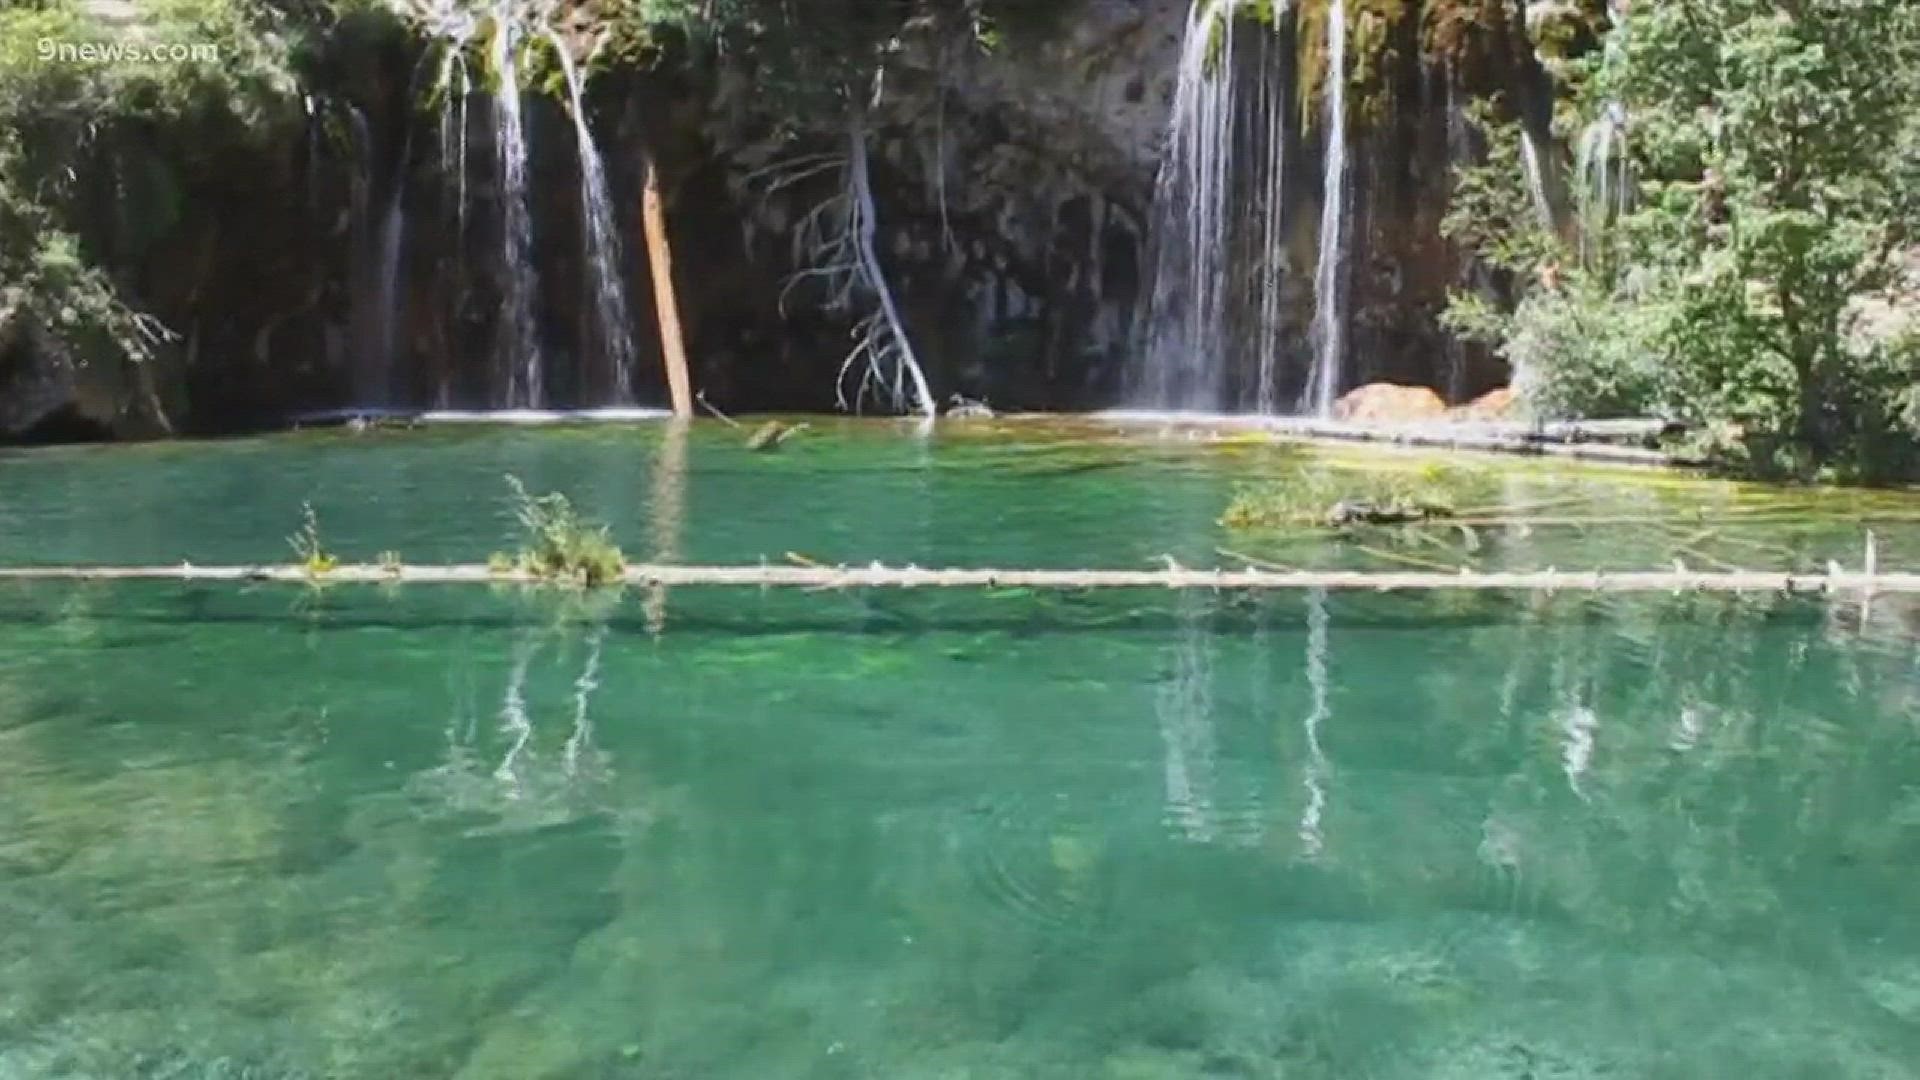 Reservations for the new permit system that's required to visit Hanging Lake will officially launch at 10 a.m. on Monday, April 1, according to a release from the city and U.S. Forest Service.